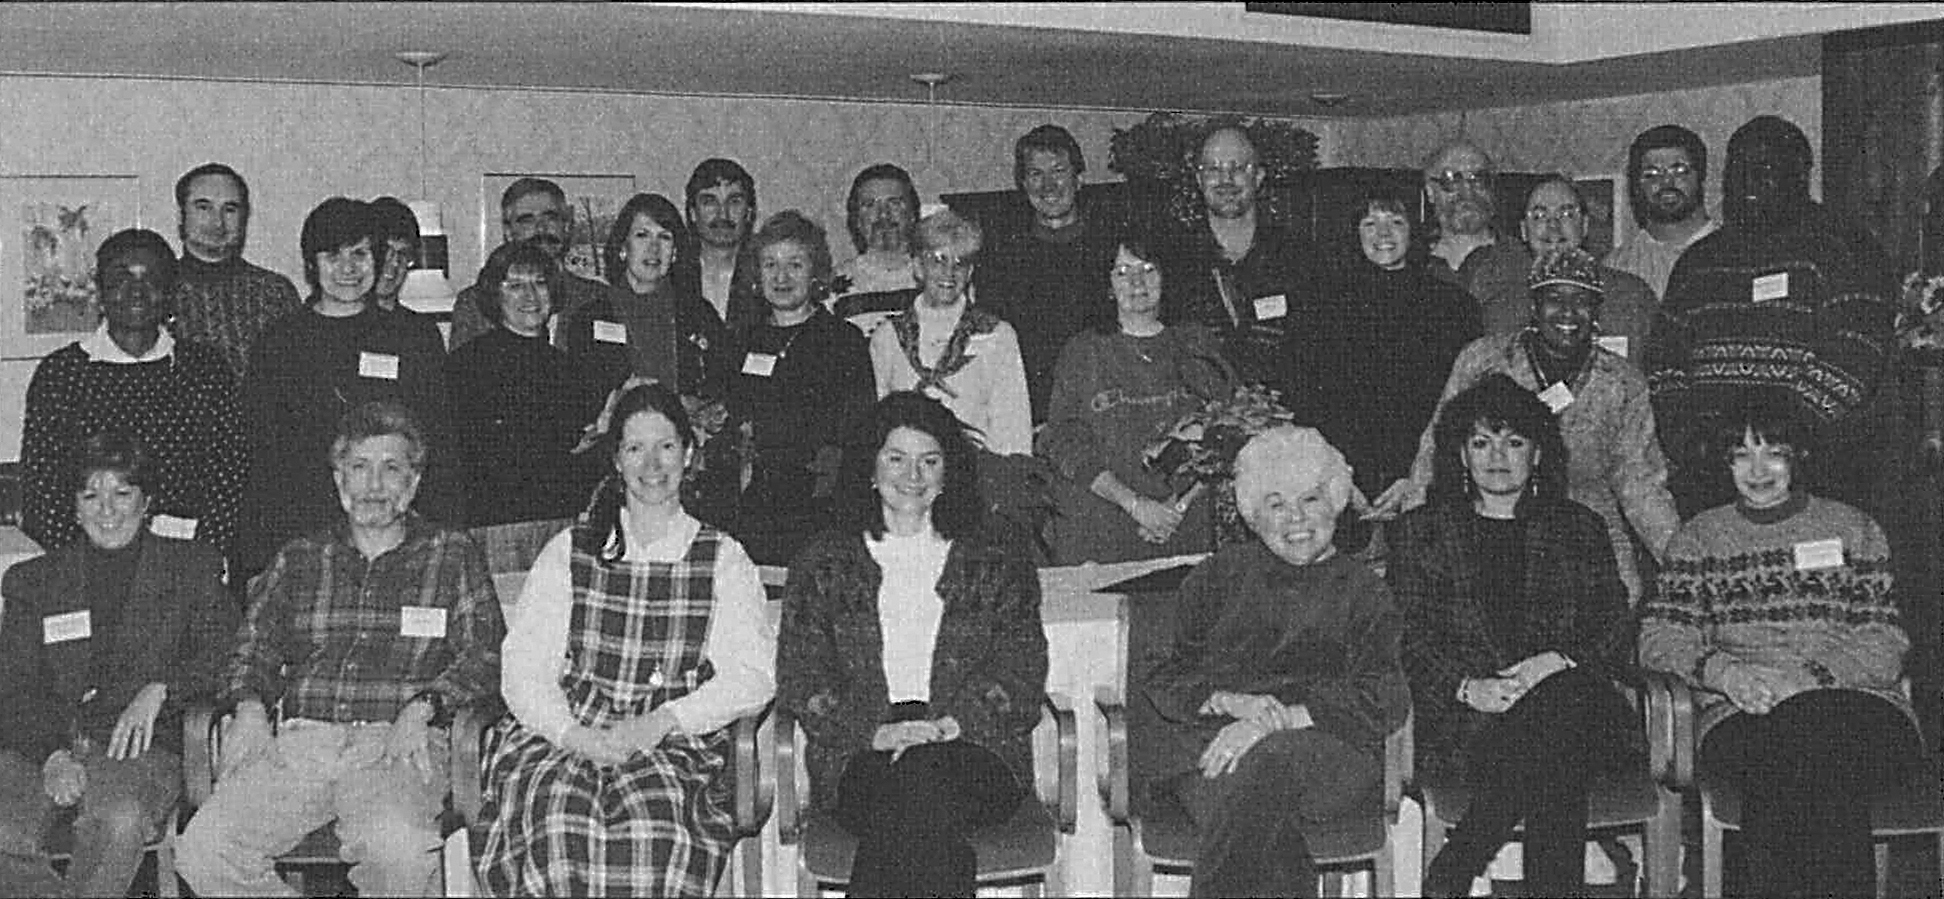 Participants and staff from the first Behavior Therapy Training Institute,
held in 1995.